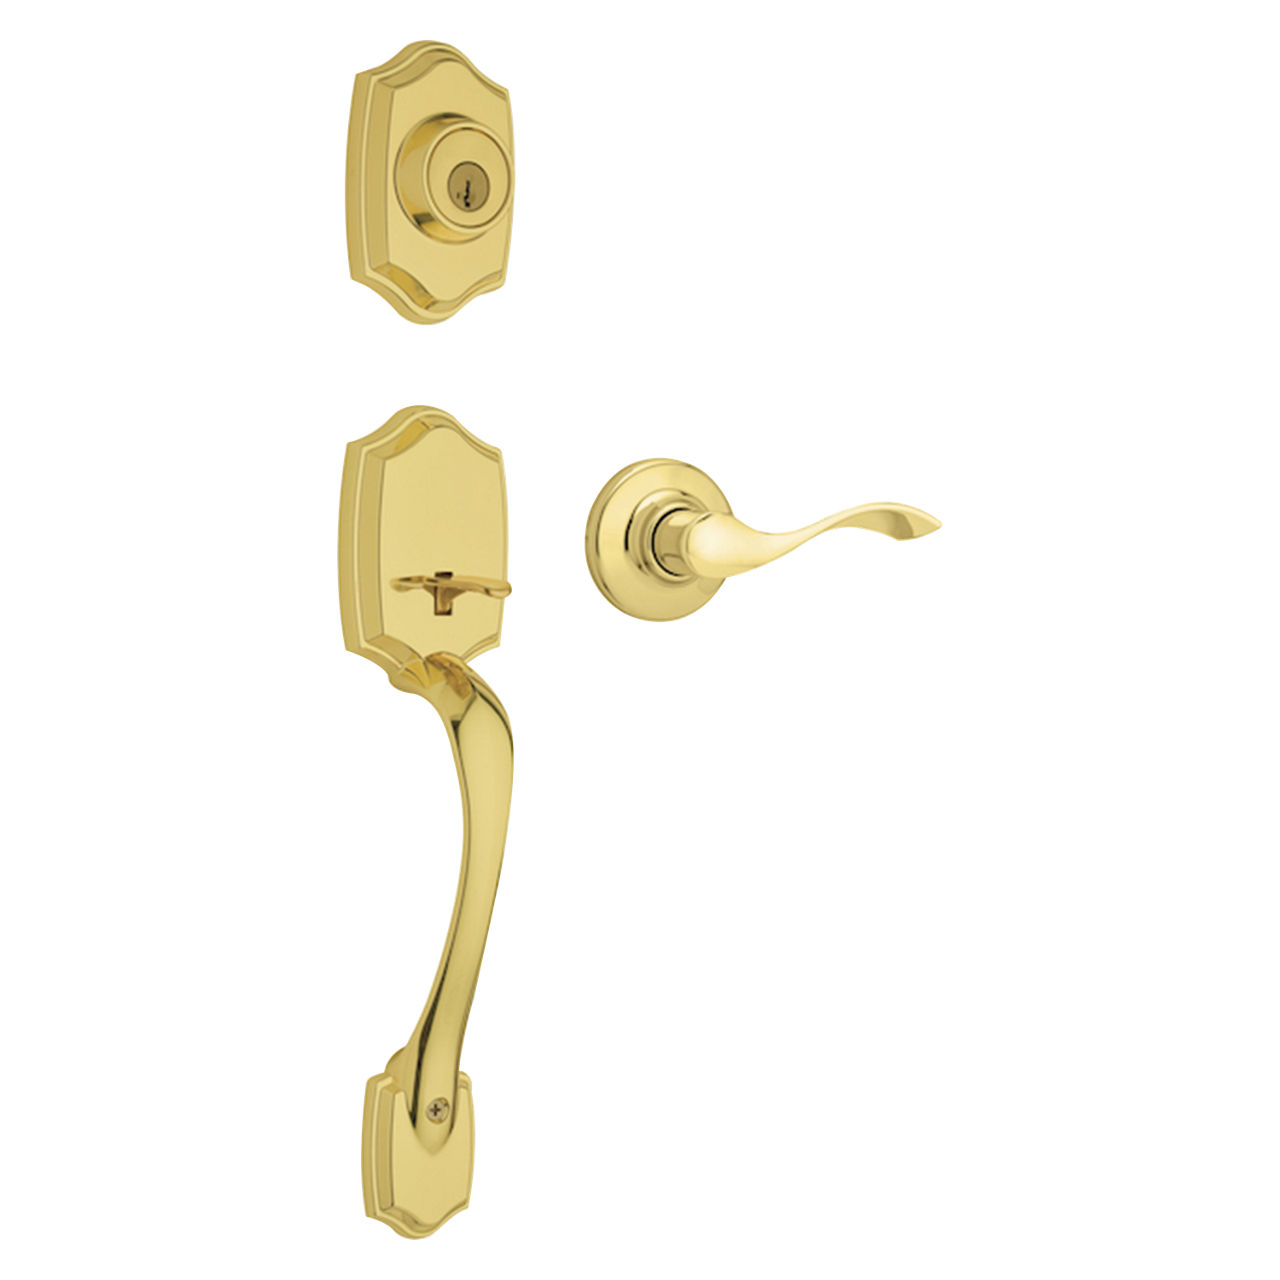 Brentwood Handleset with Belmont Lever - featuring SmartKey